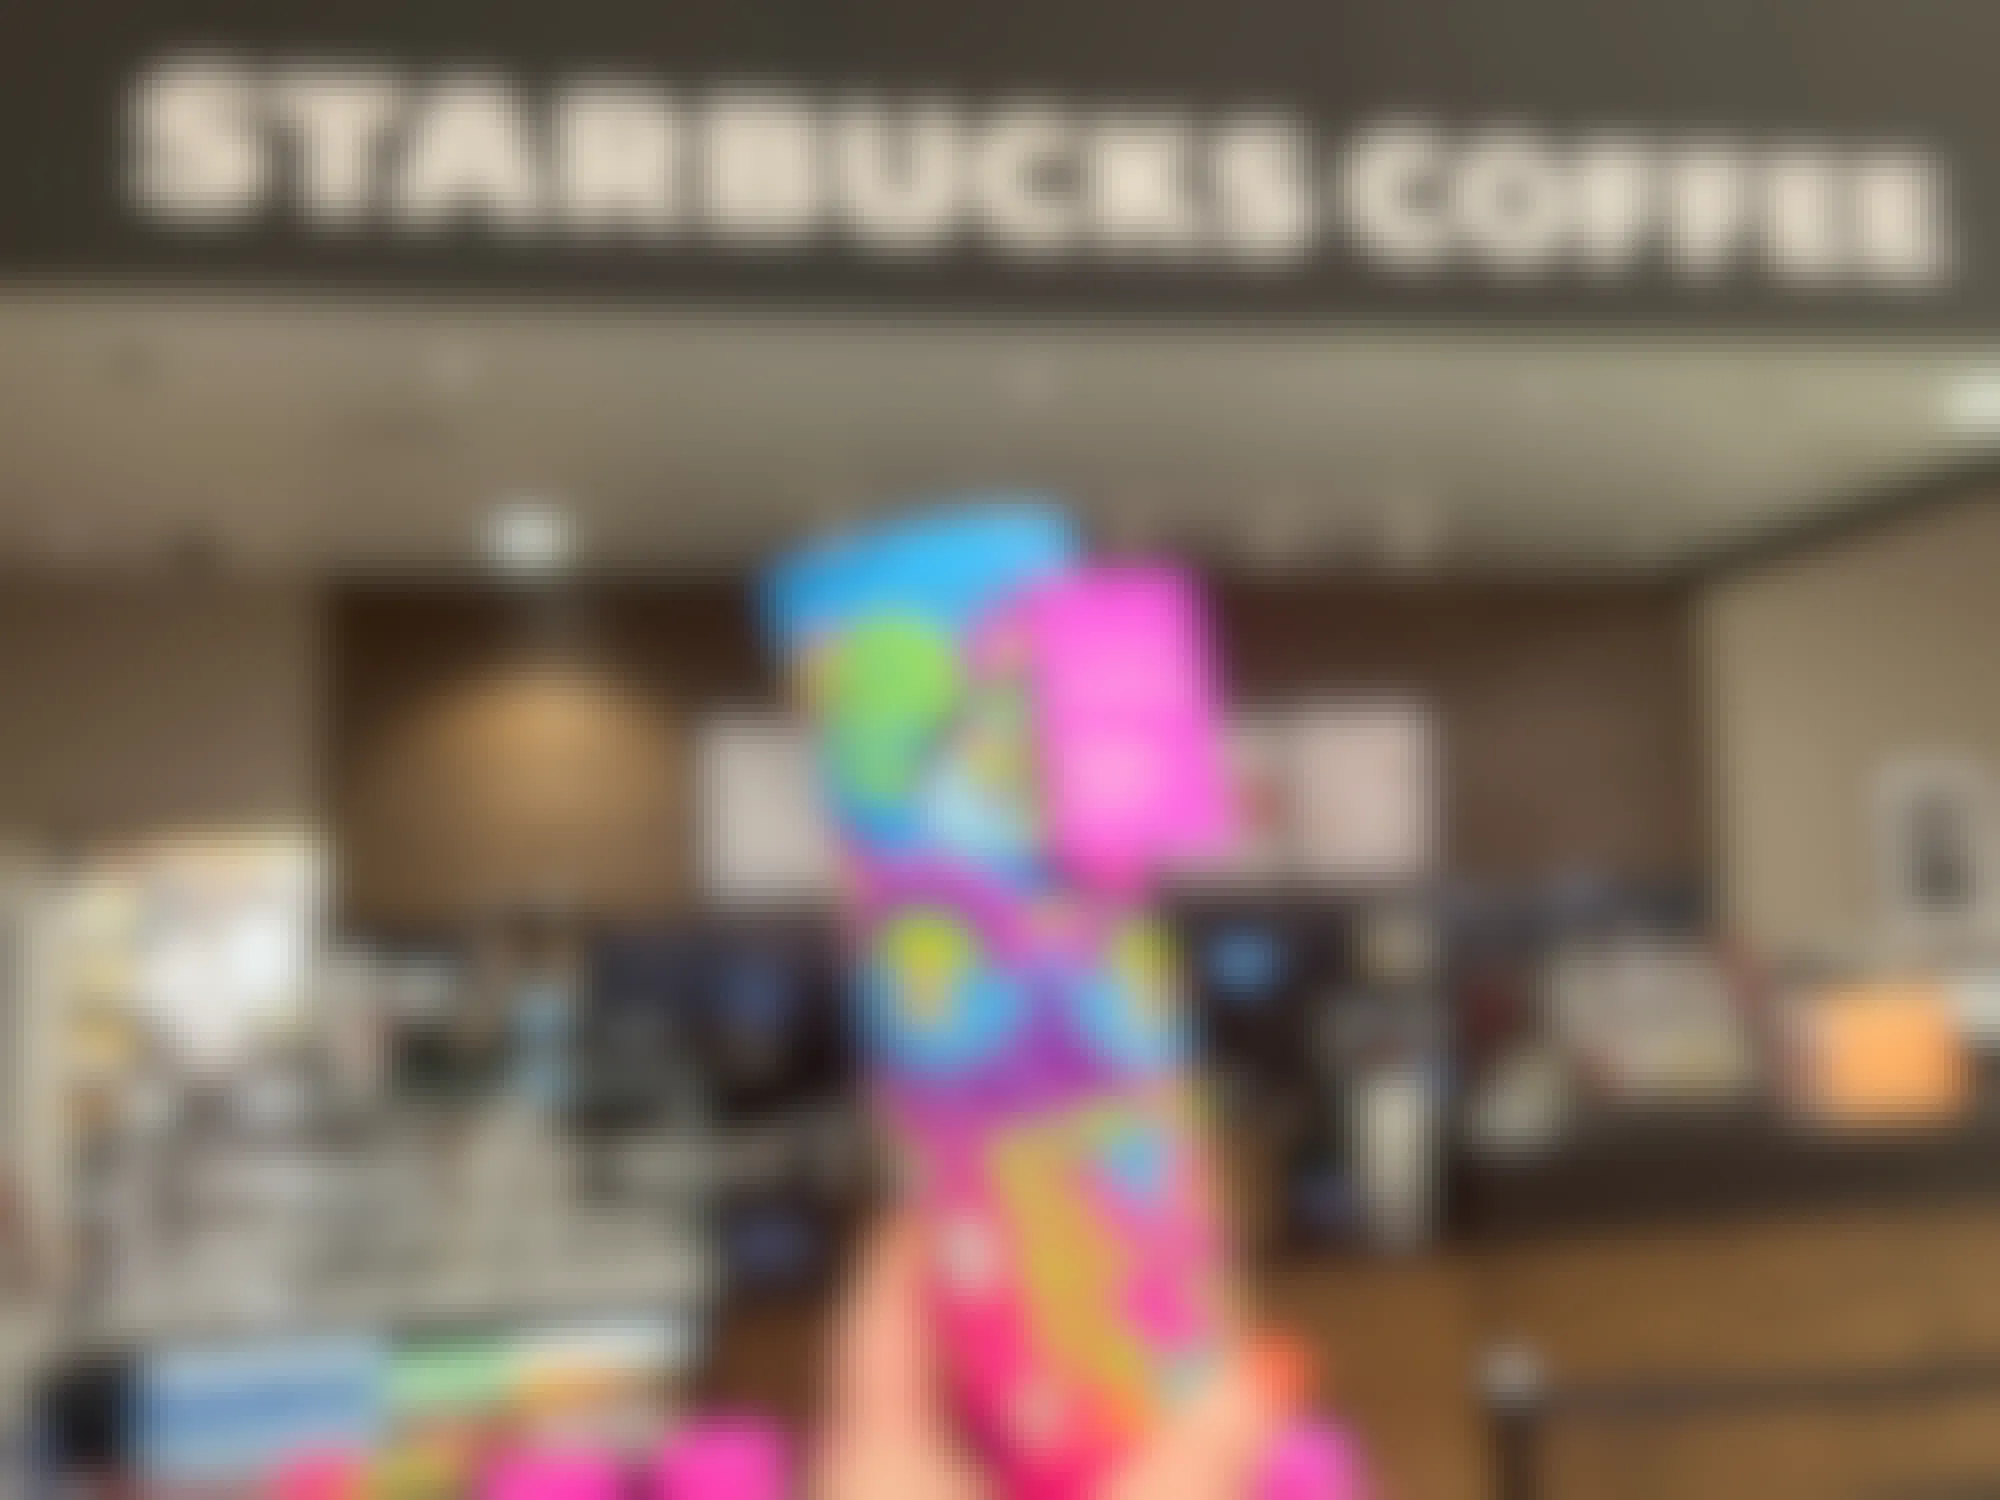 Someone holding up a Starbucks Pride cup inside a Starbucks